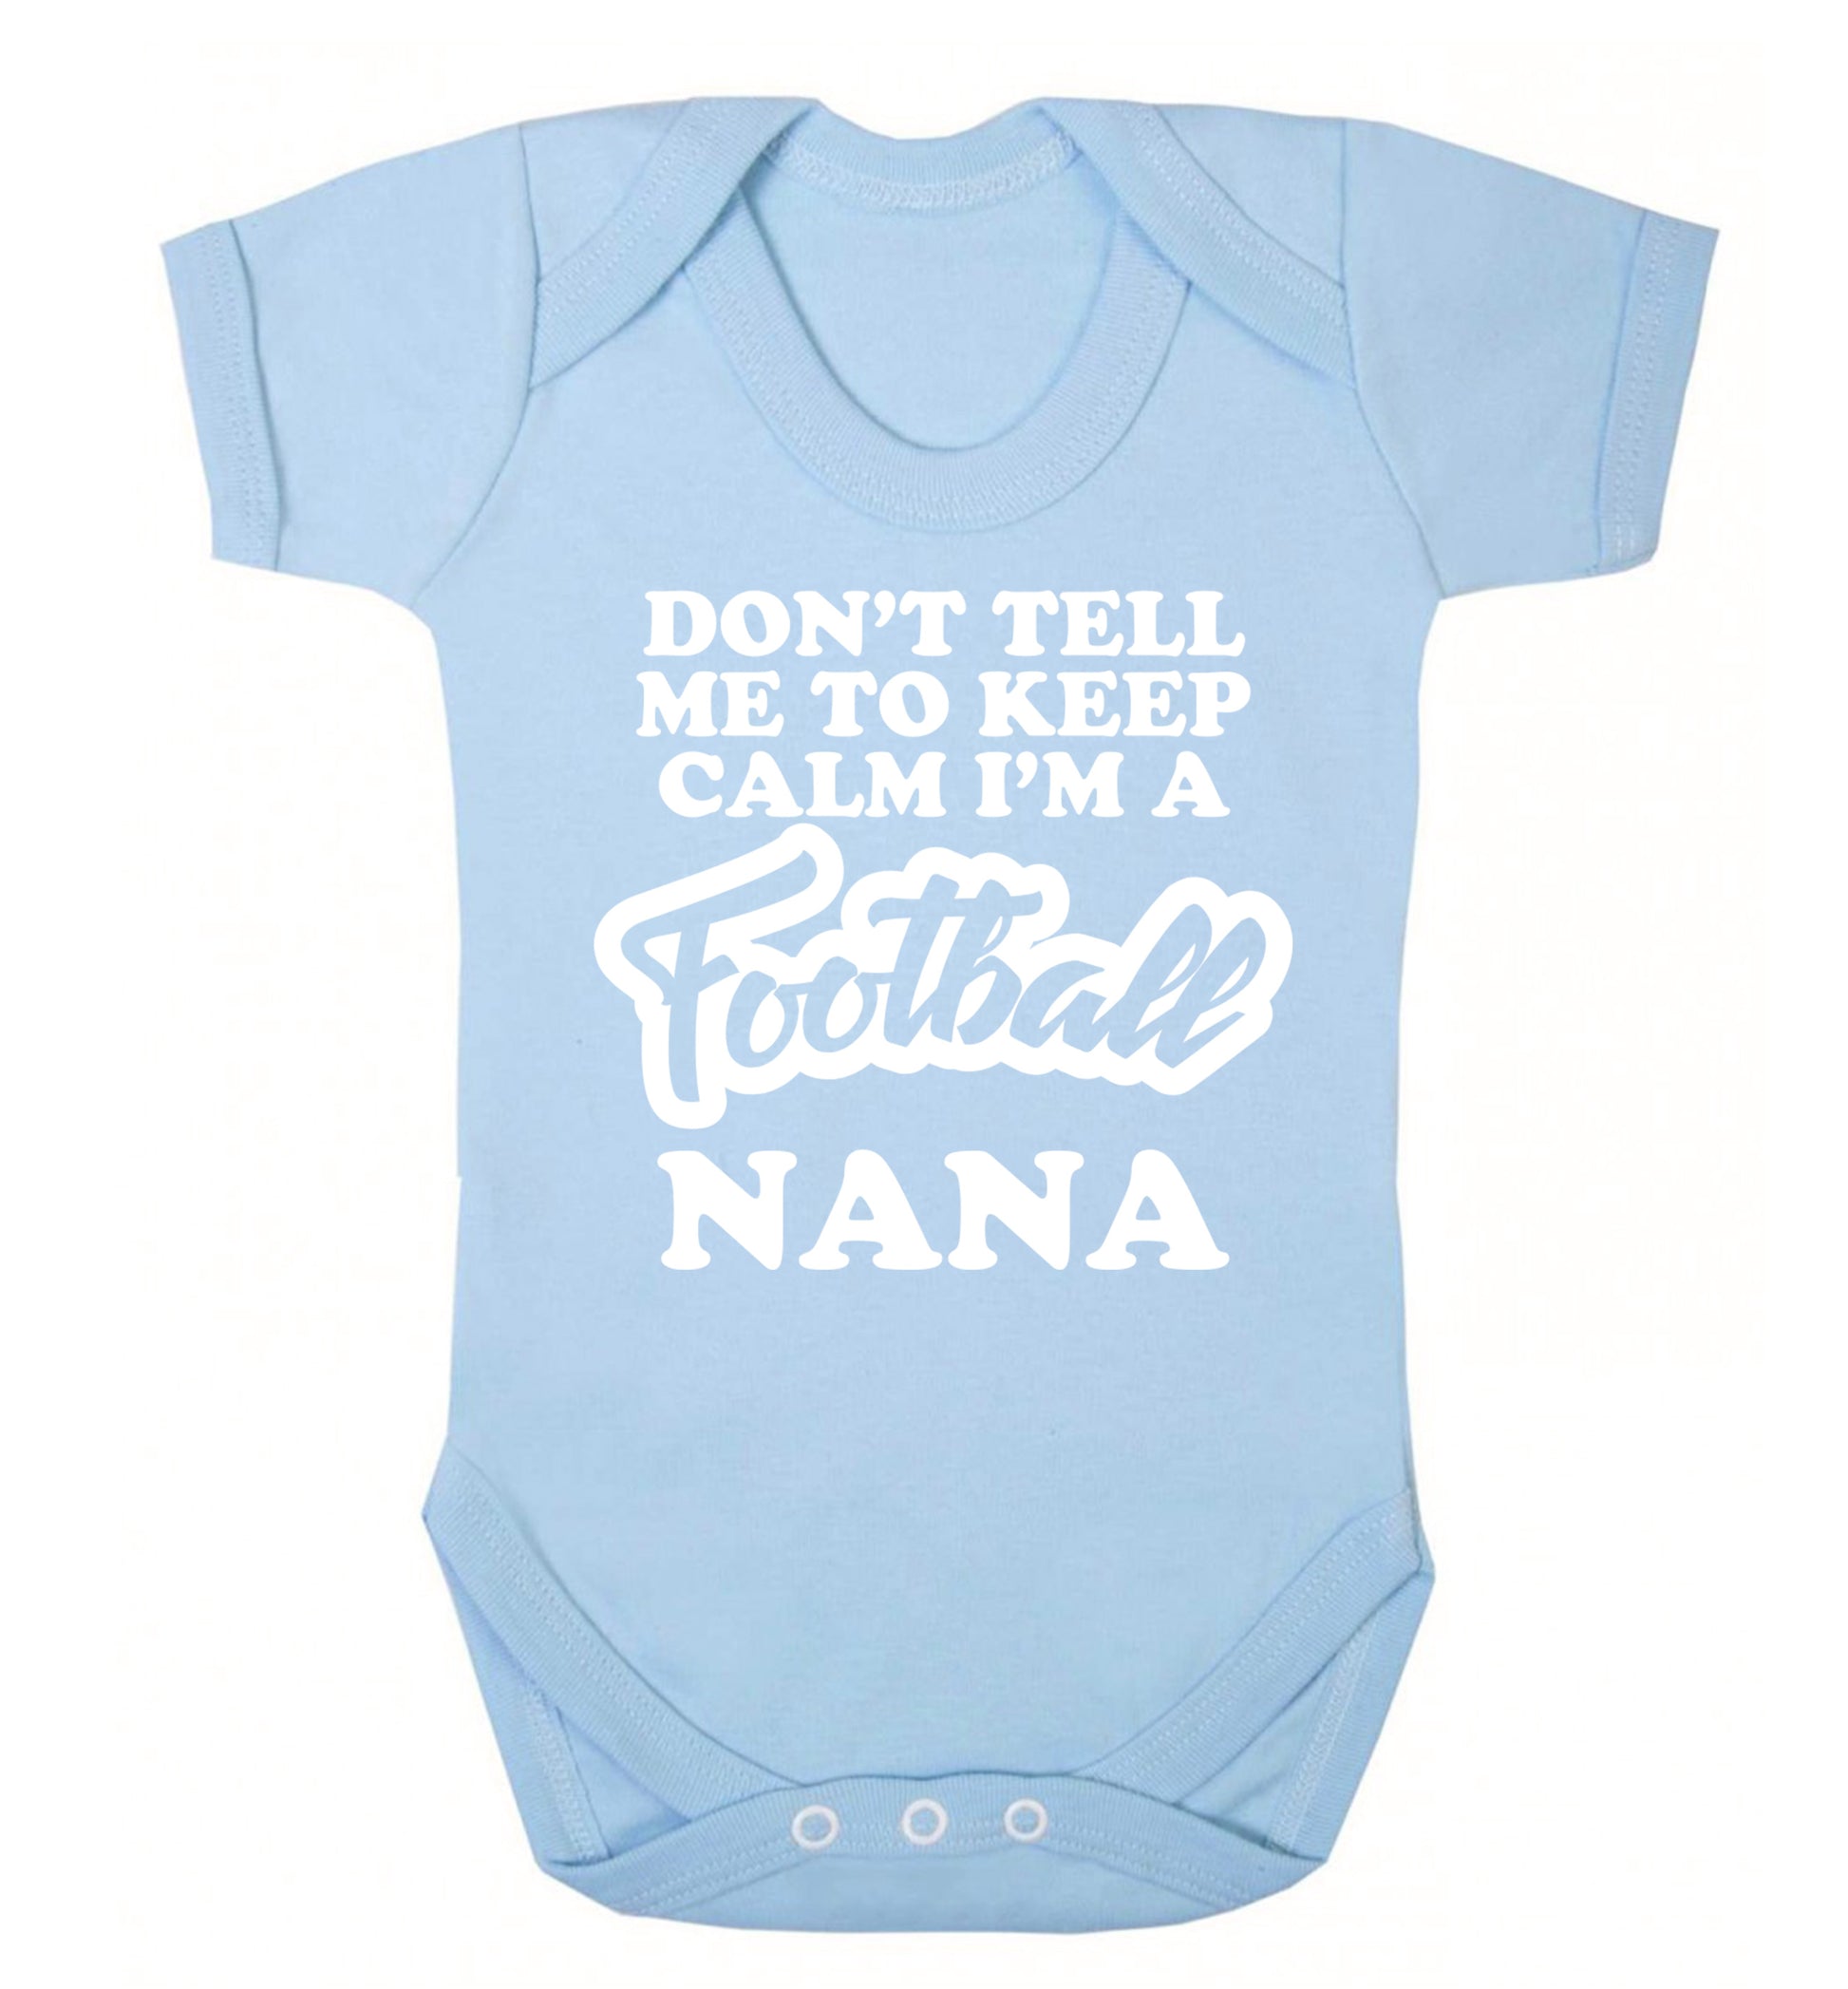 Don't tell me to keep calm I'm a football nana Baby Vest pale blue 18-24 months